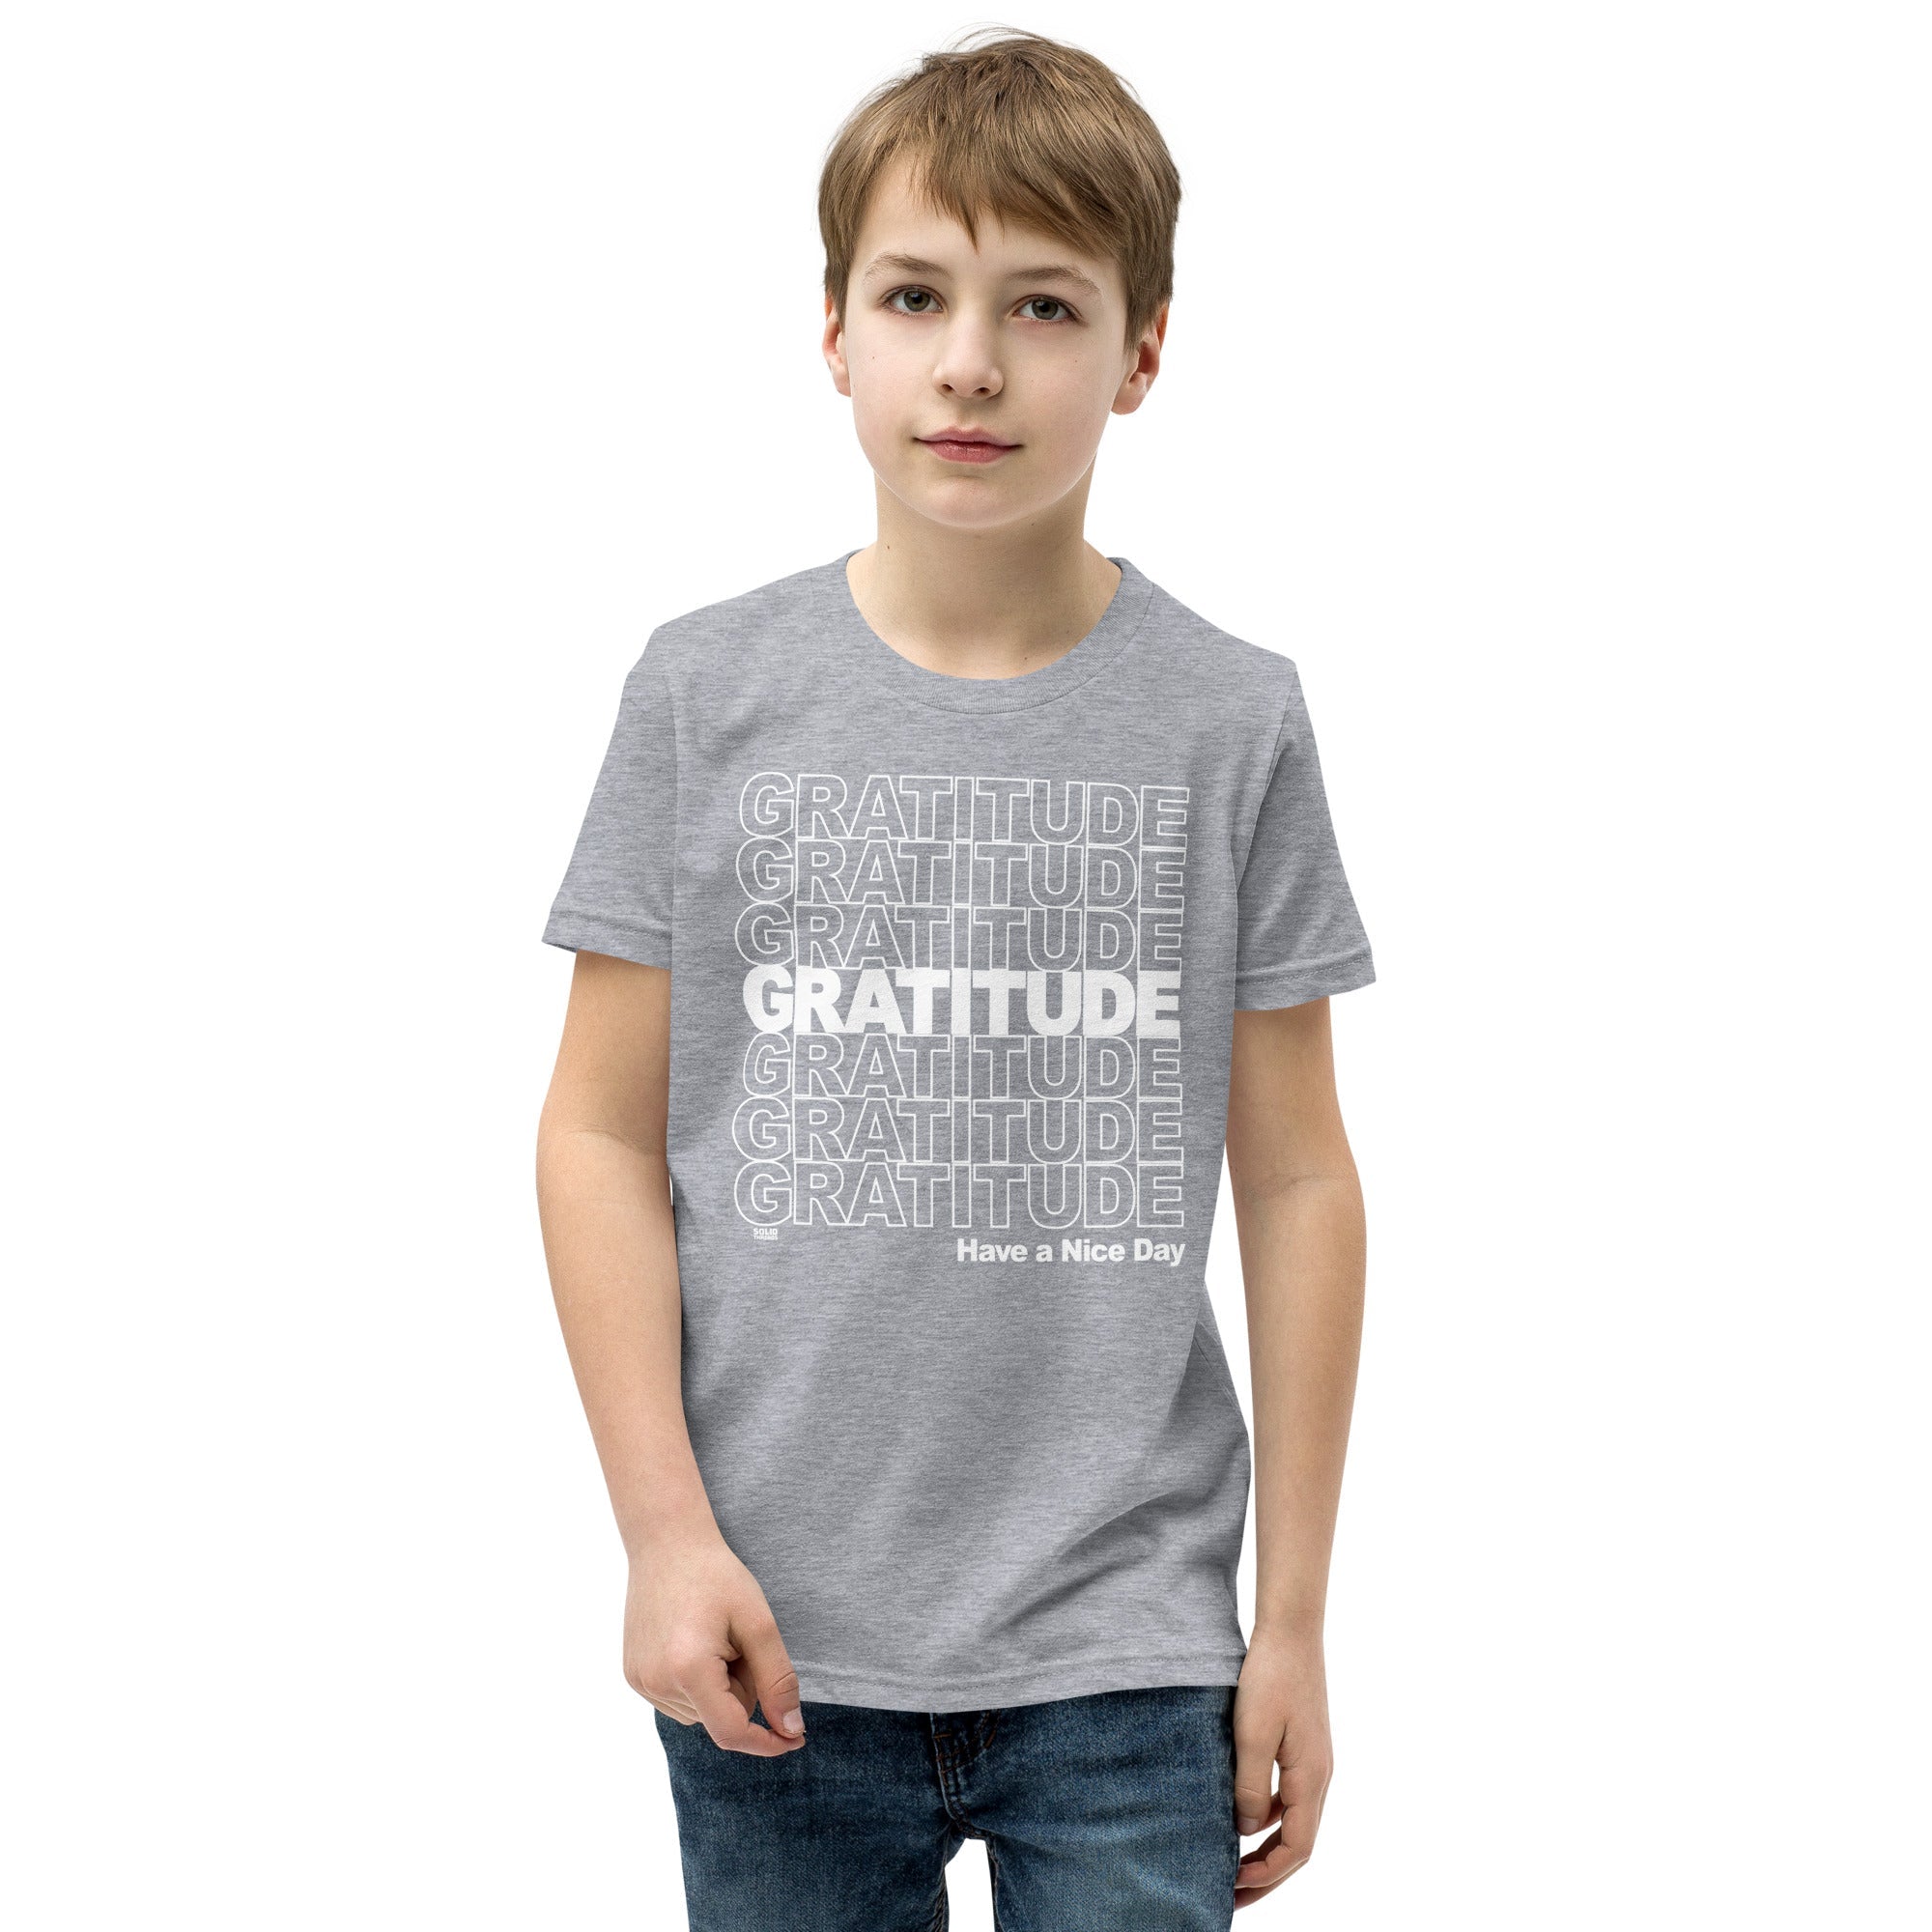 Youth Gratitude Cool Happy Extra Soft T-Shirt | Retro Wholesome Kids Tee Boy Model | Solid Threads